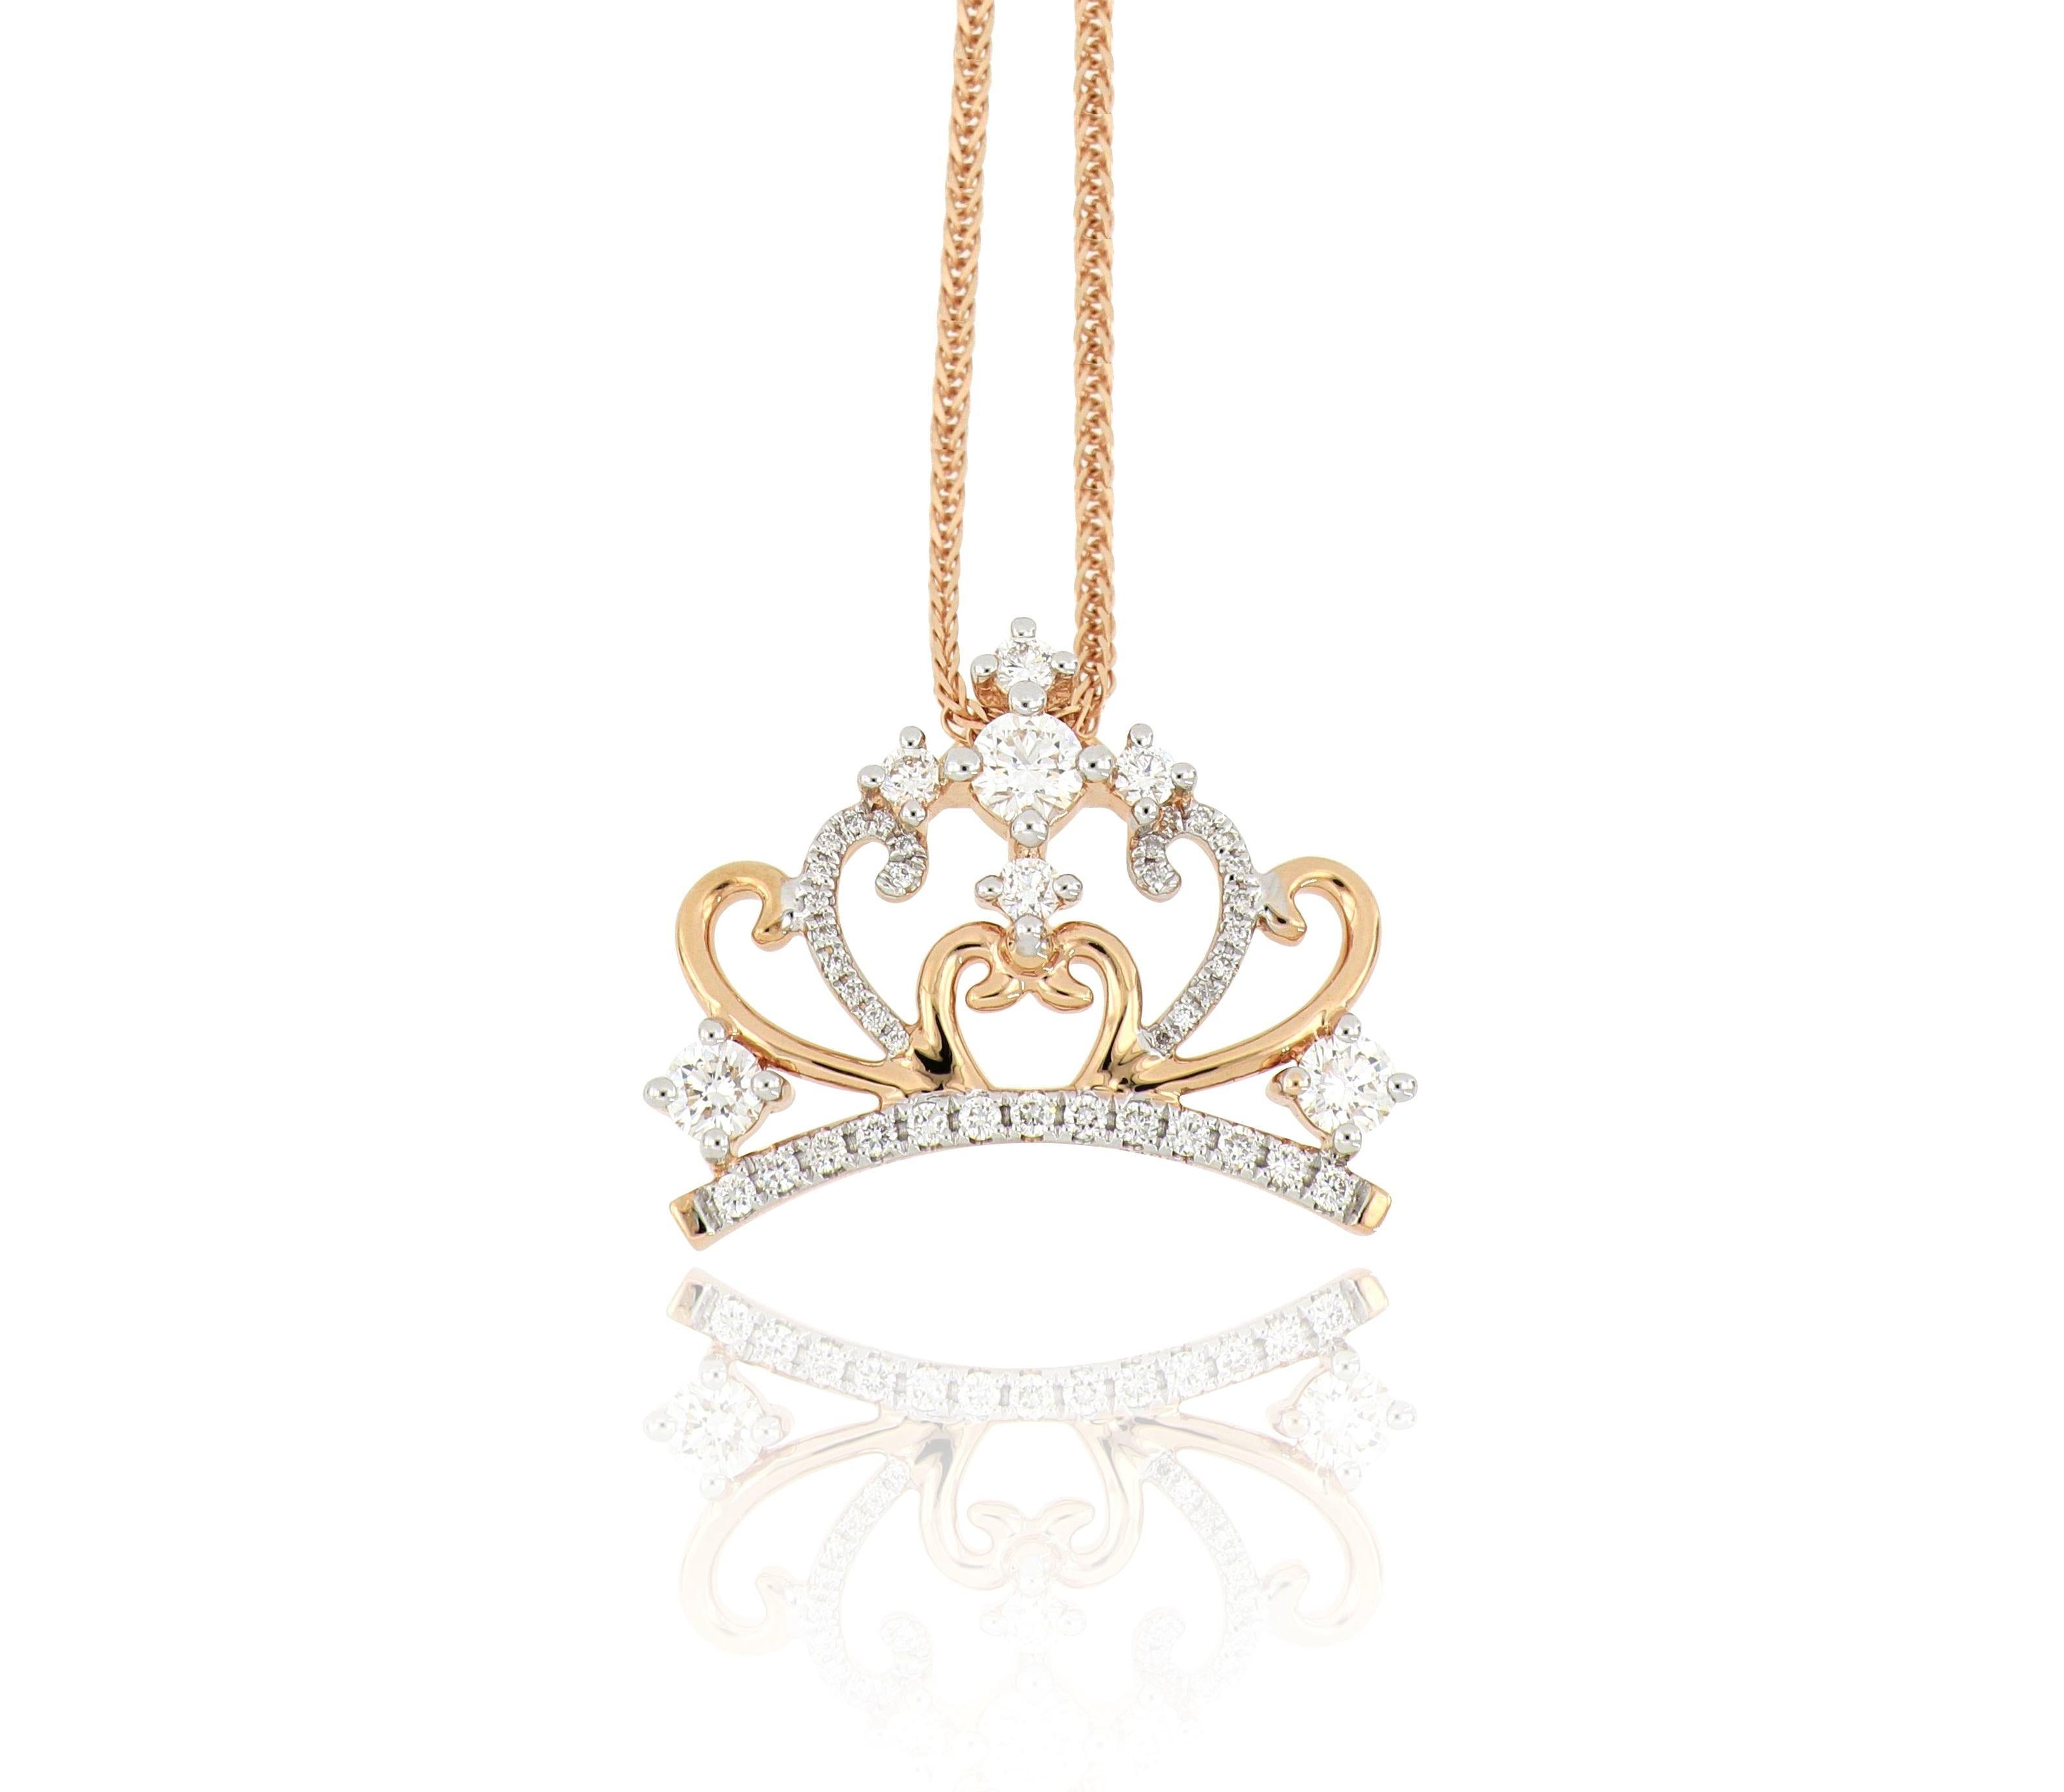 Diamond pendant, set with diamonds weighing 0.24 carats, mounted in 18 Karat gold, available in different colours (white gold and rose gold)
The pendant was specially designed for the winners of the Miss Macau 2019 beauty contest, according to the